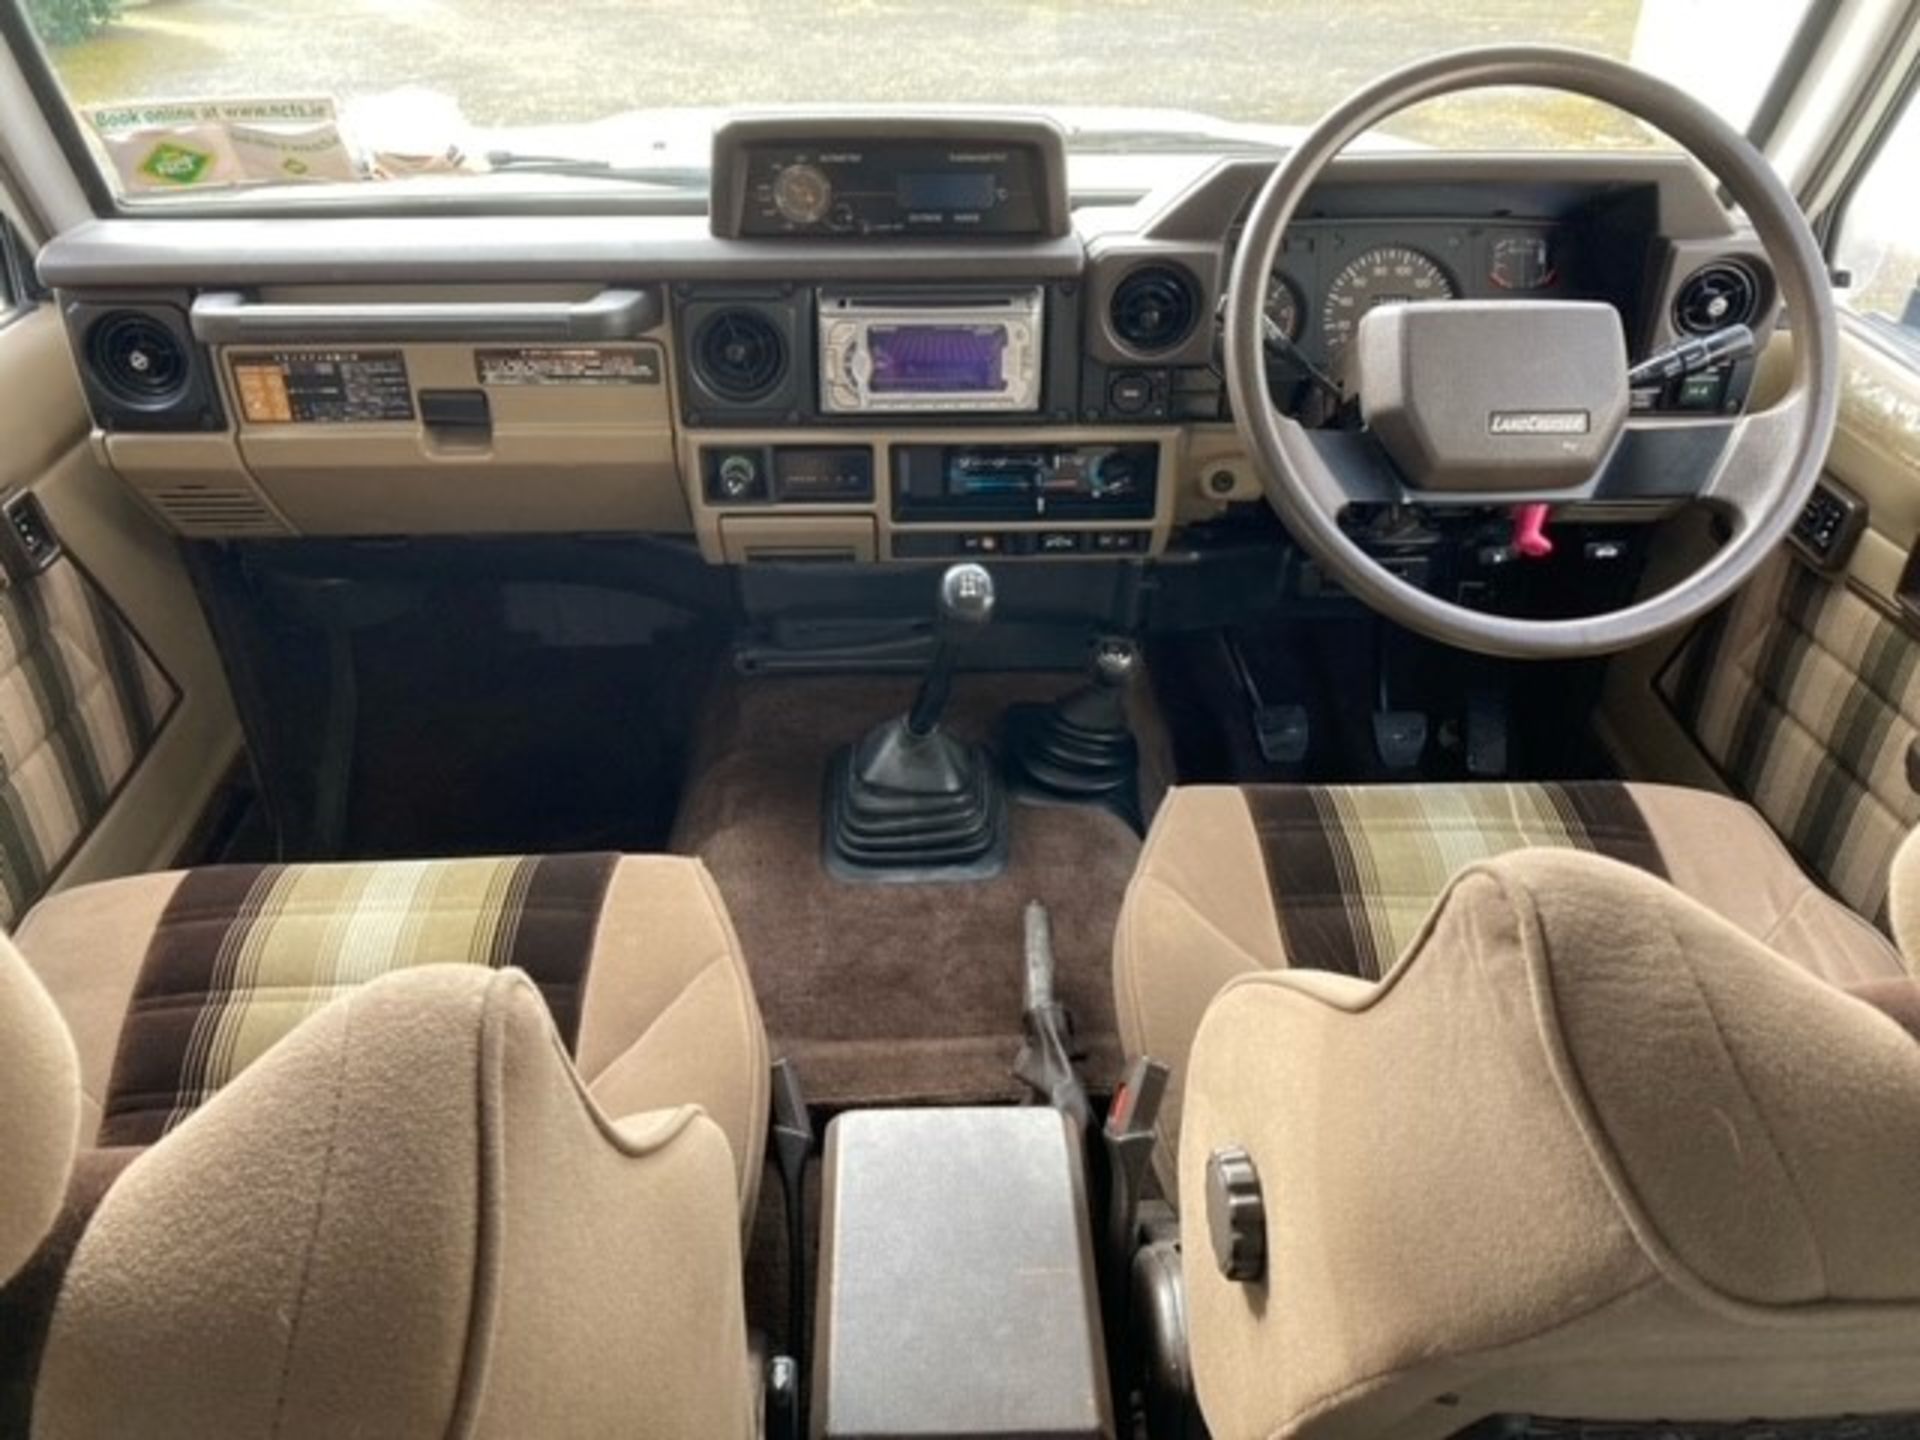 Toyota Landcruiser 1989 A nice example of this increasingly collectable 4x4 from long term - Bild 12 aus 30